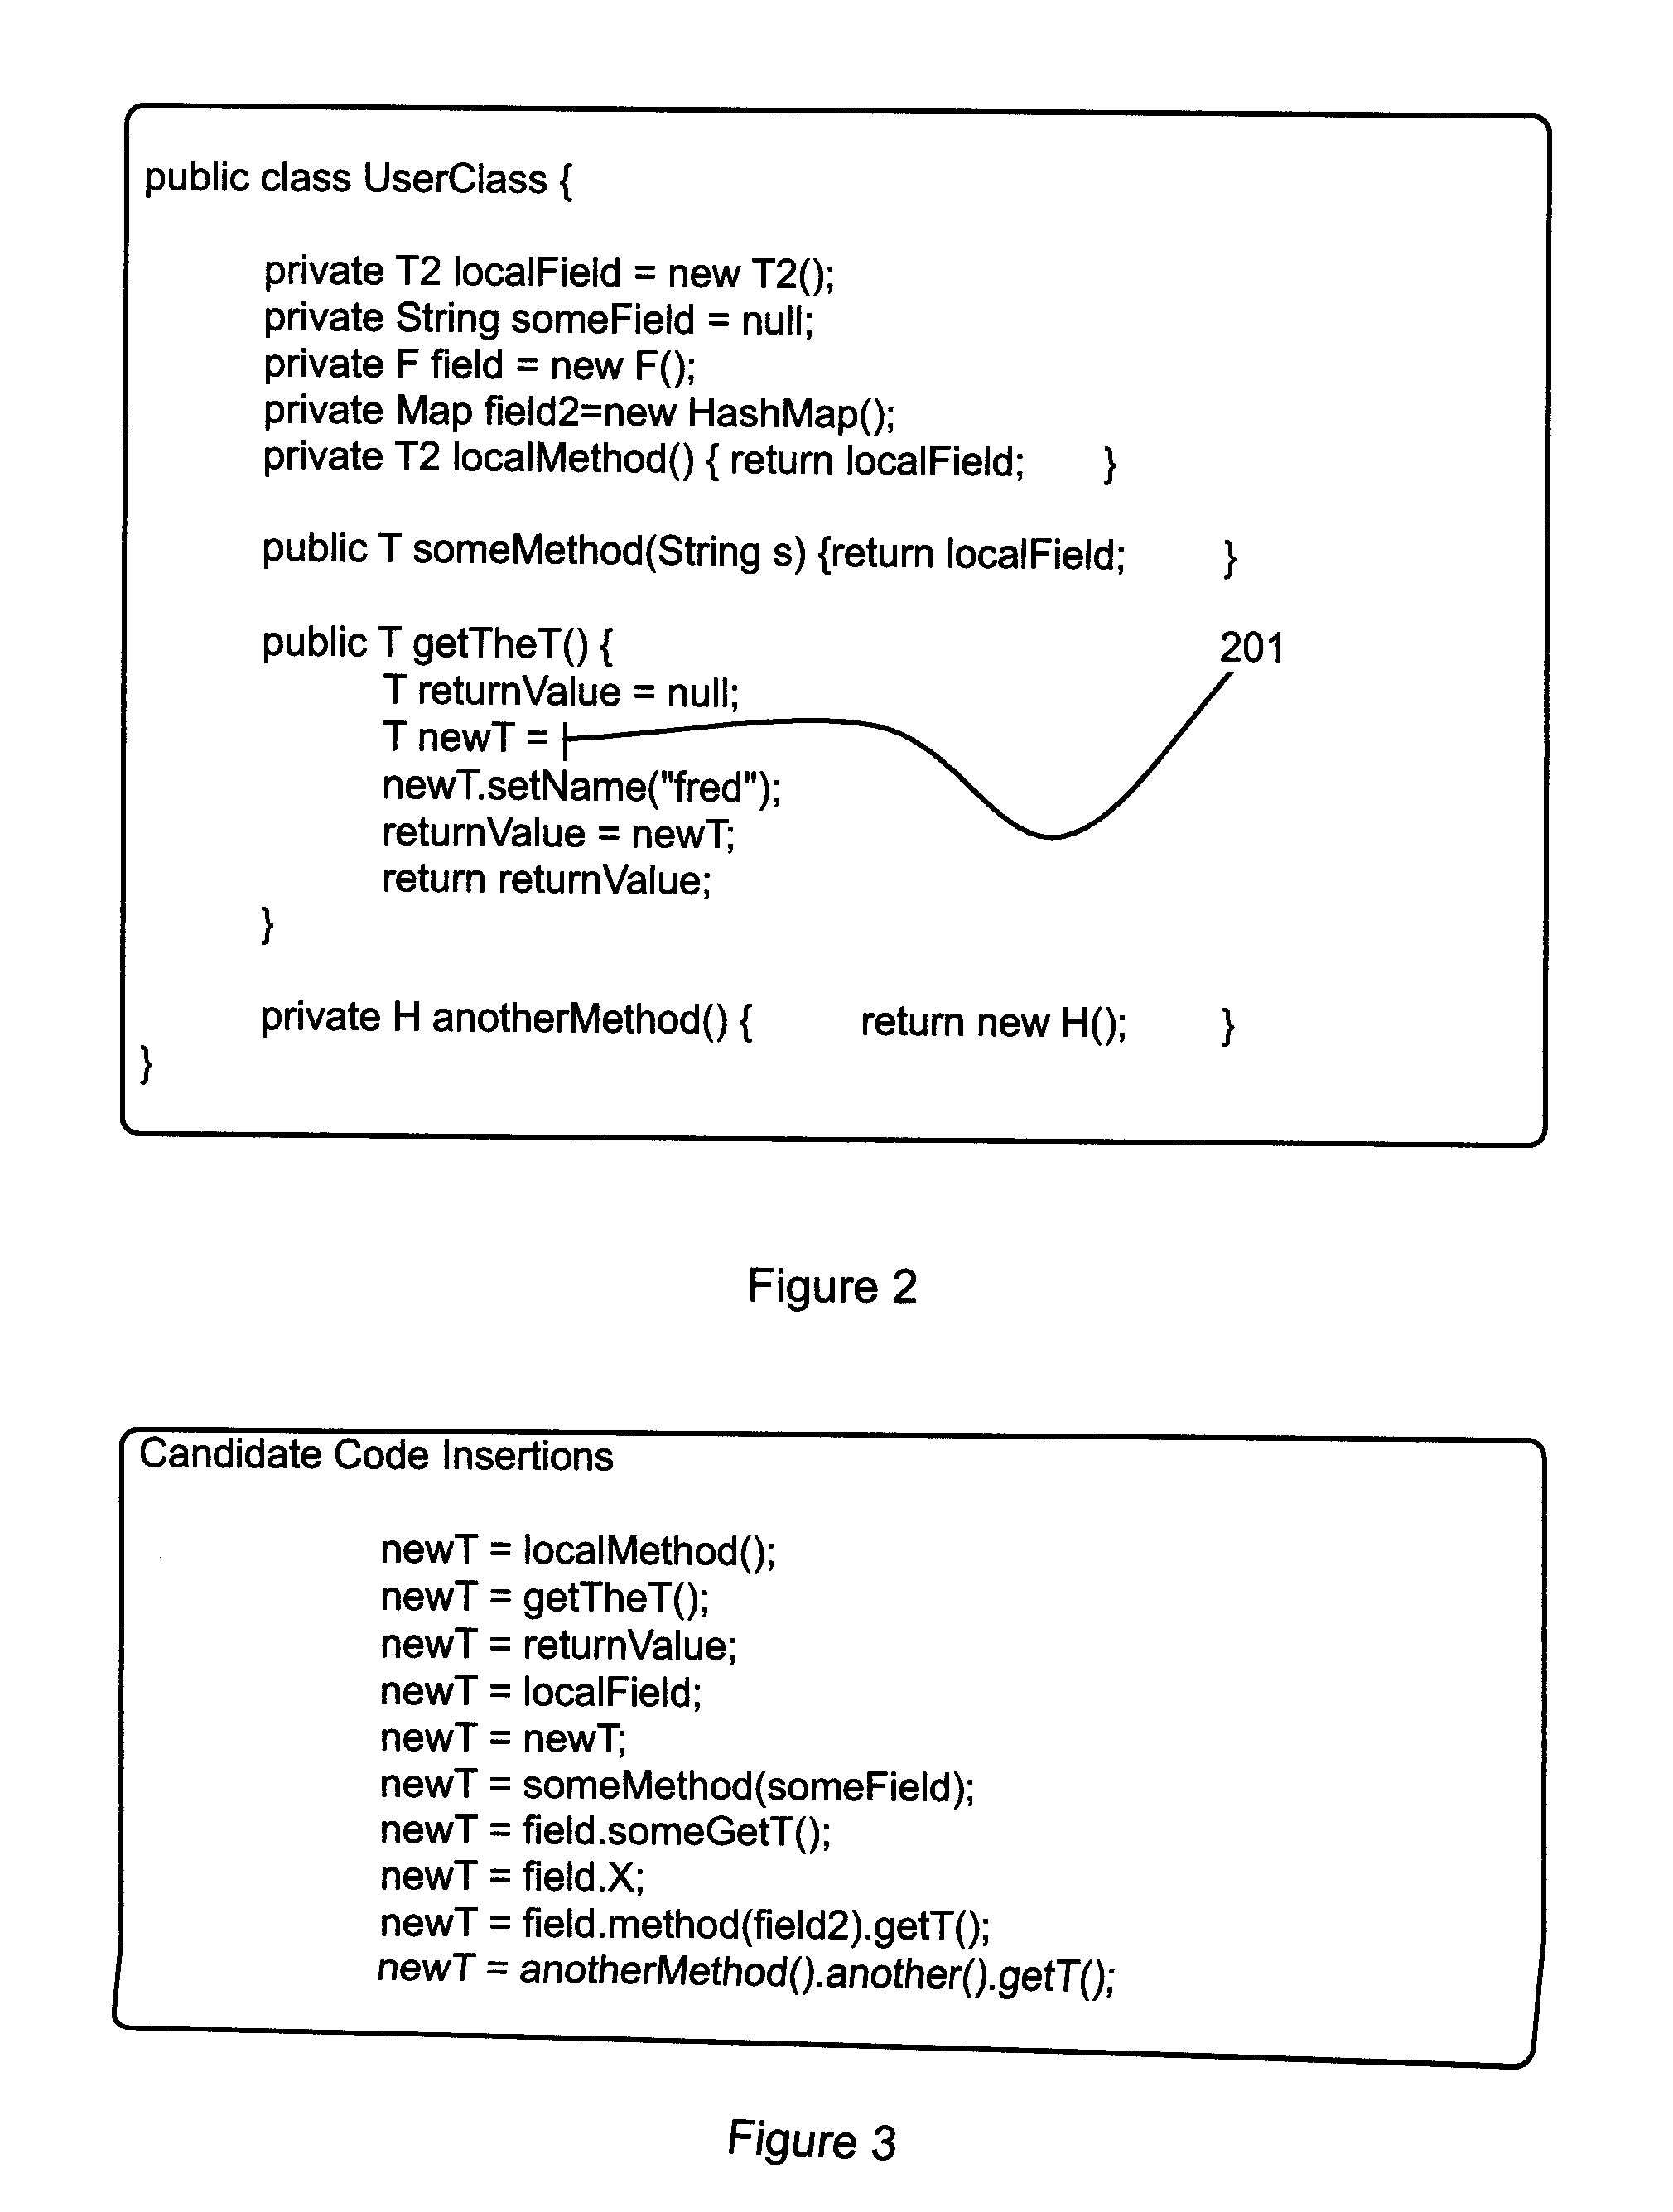 Determinatioin of a set of candidate code insertions for insertion in program code